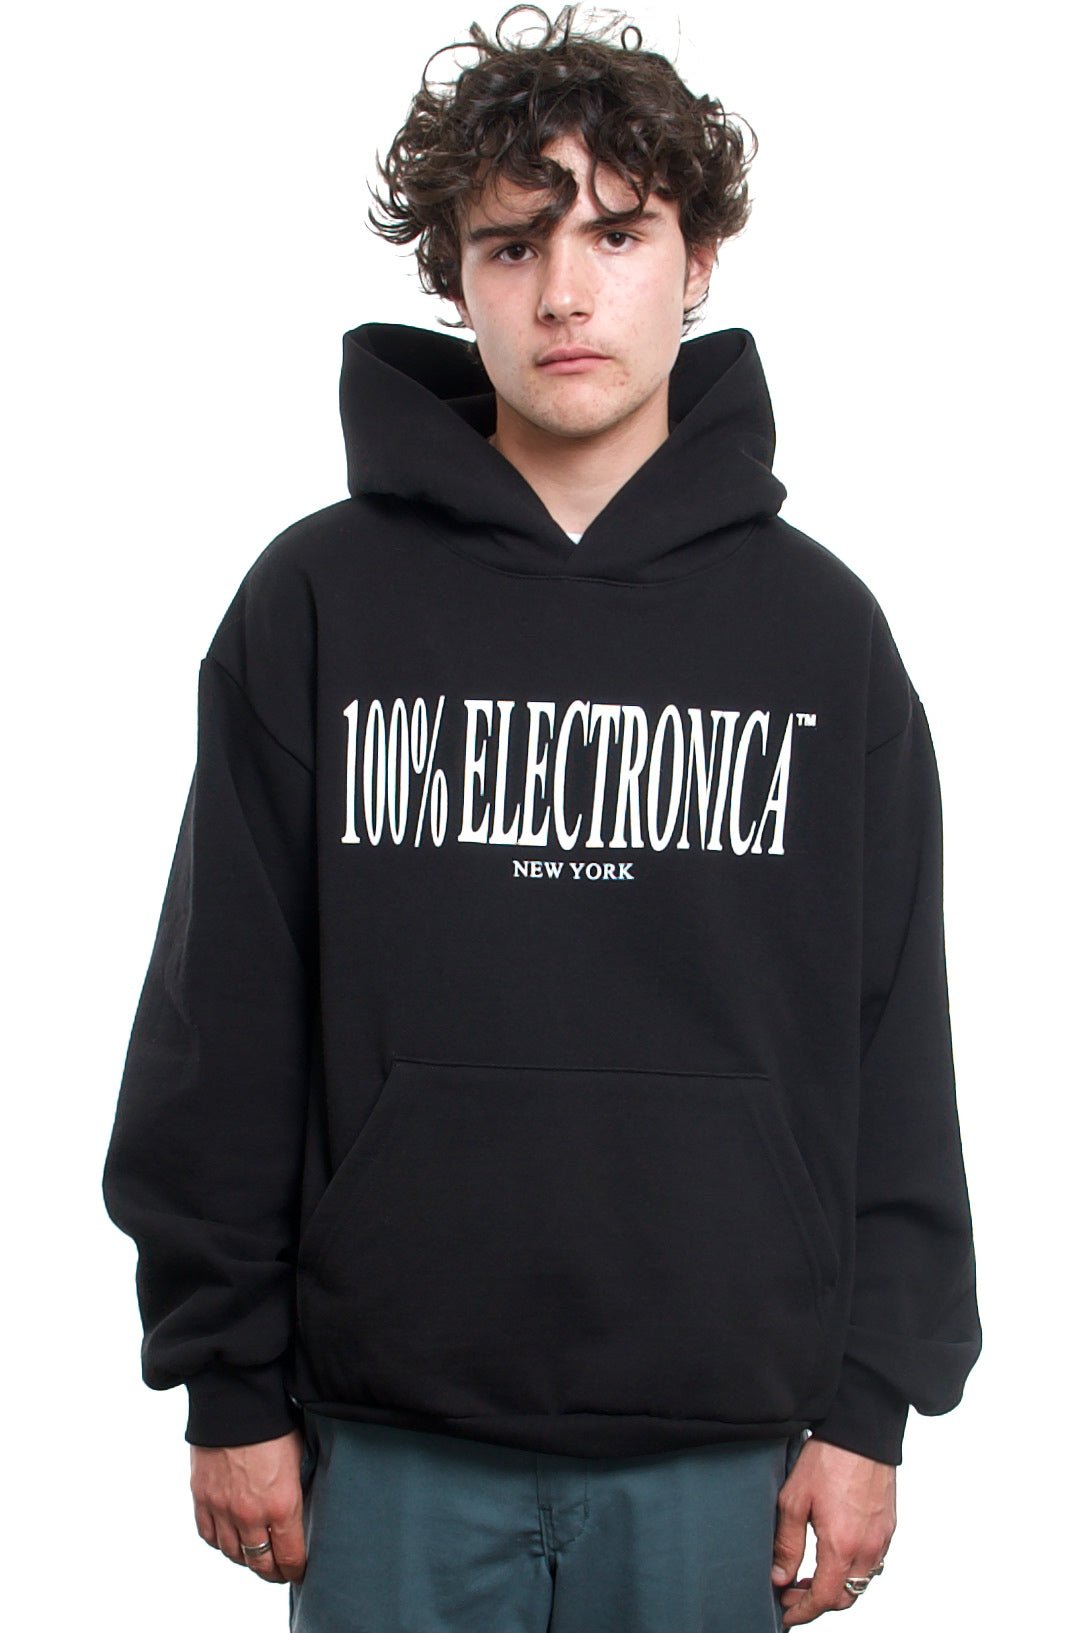 100% Electronica - 100% Electronica Hoodie - Black - 100% Electronica Official Store (Photo 1)